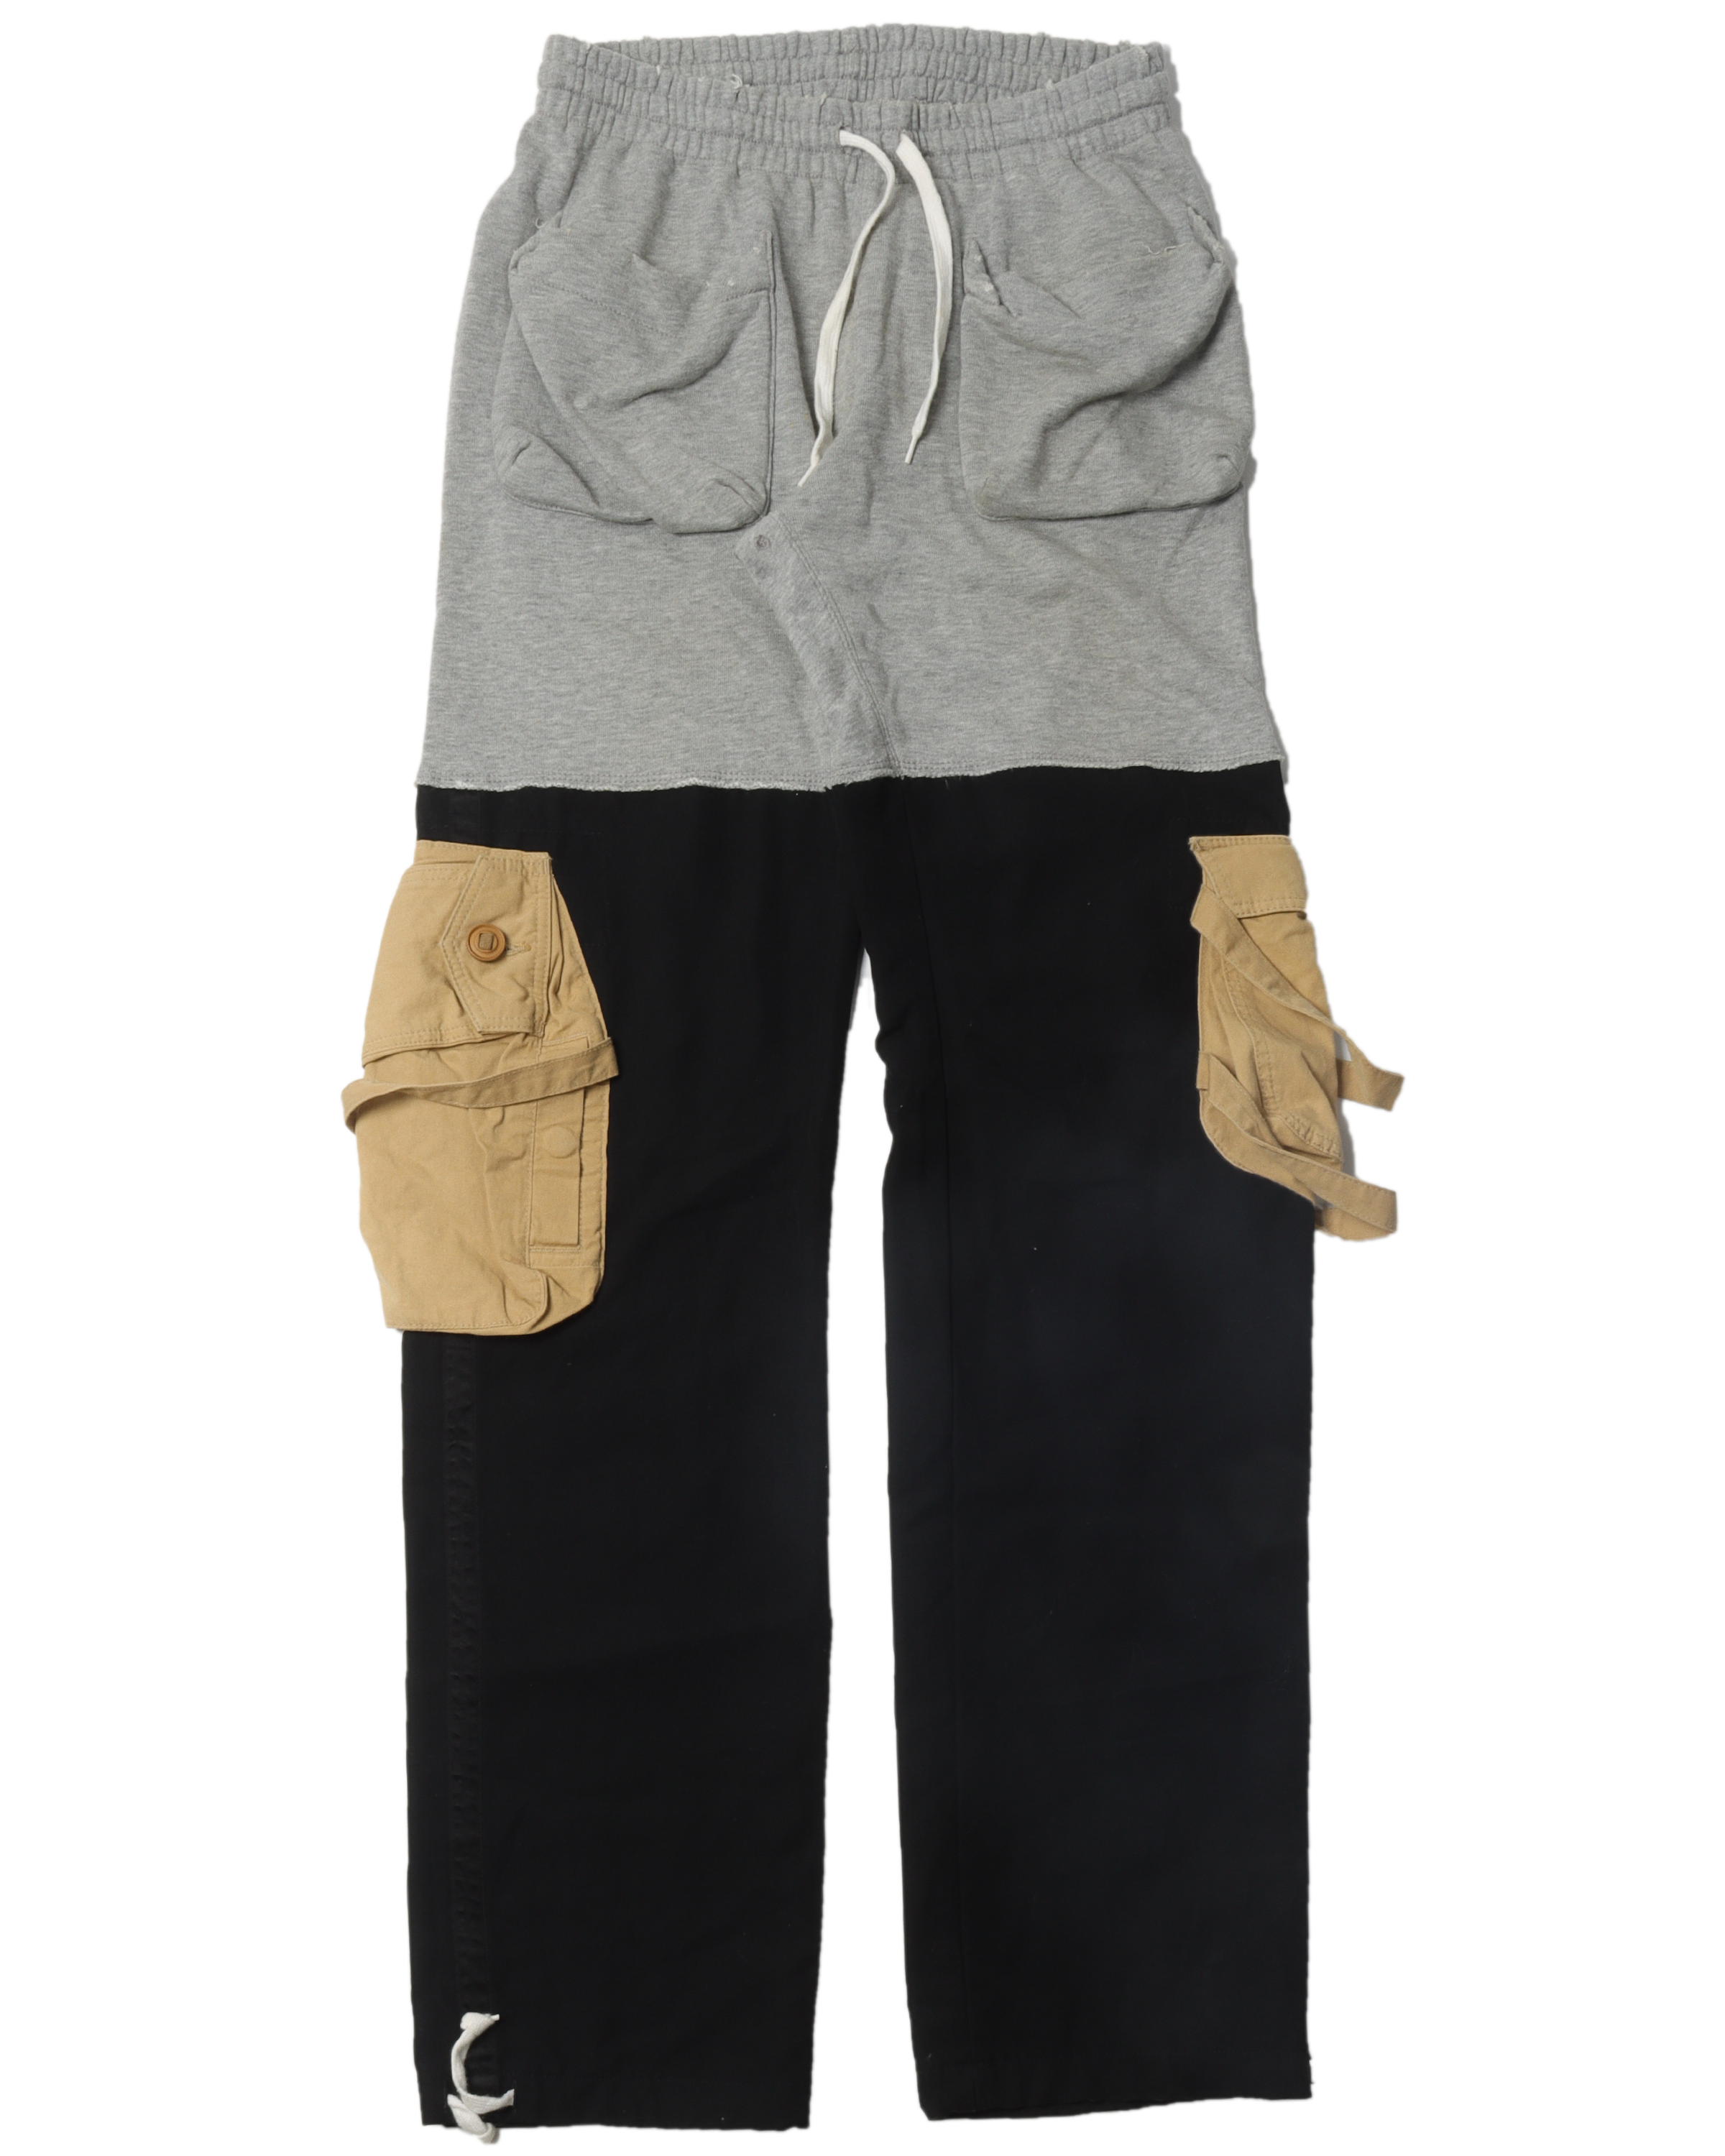 AW05 "The High Streets" Hybrid Cargo Pants